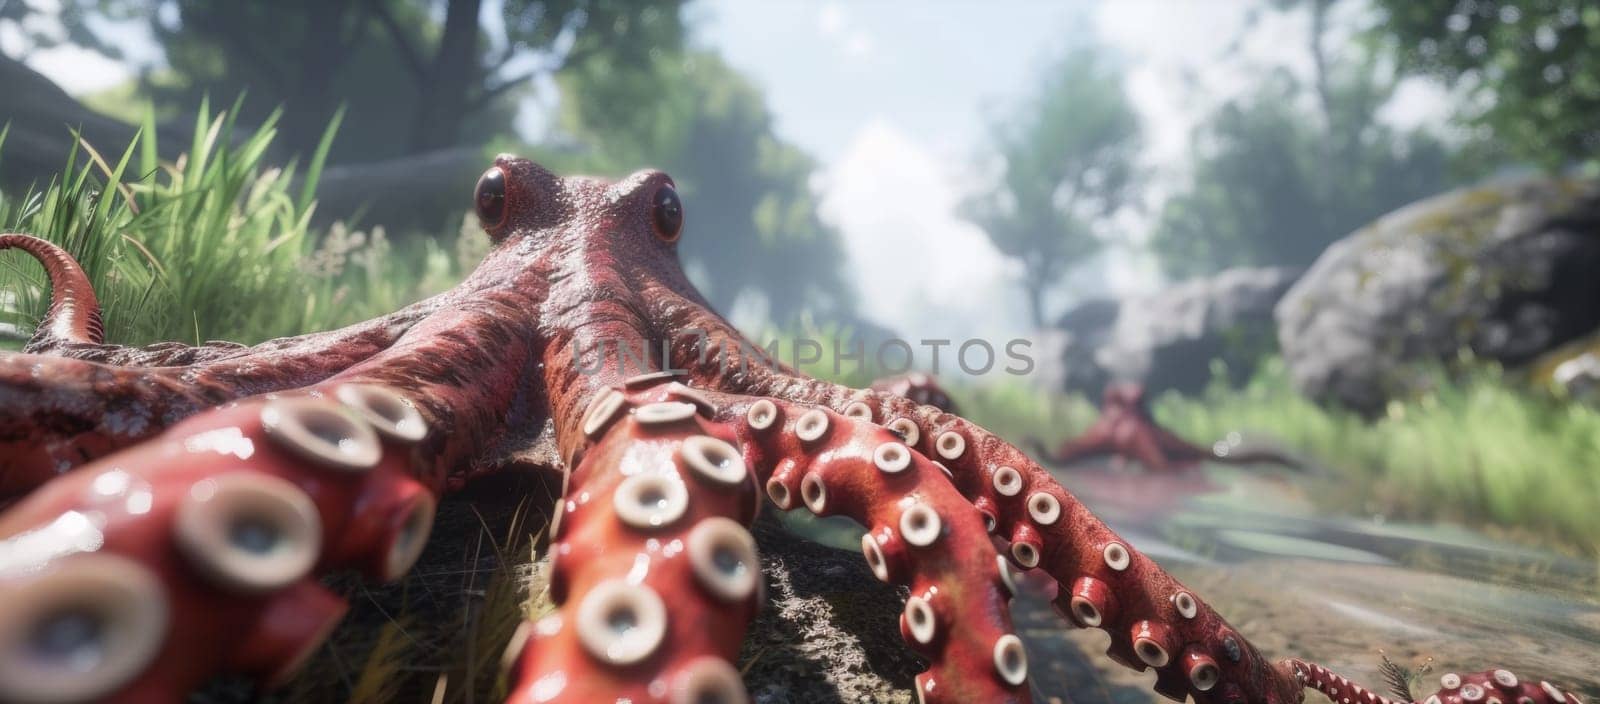 A close up of an octopus with many tentacles on the ground, AI by starush